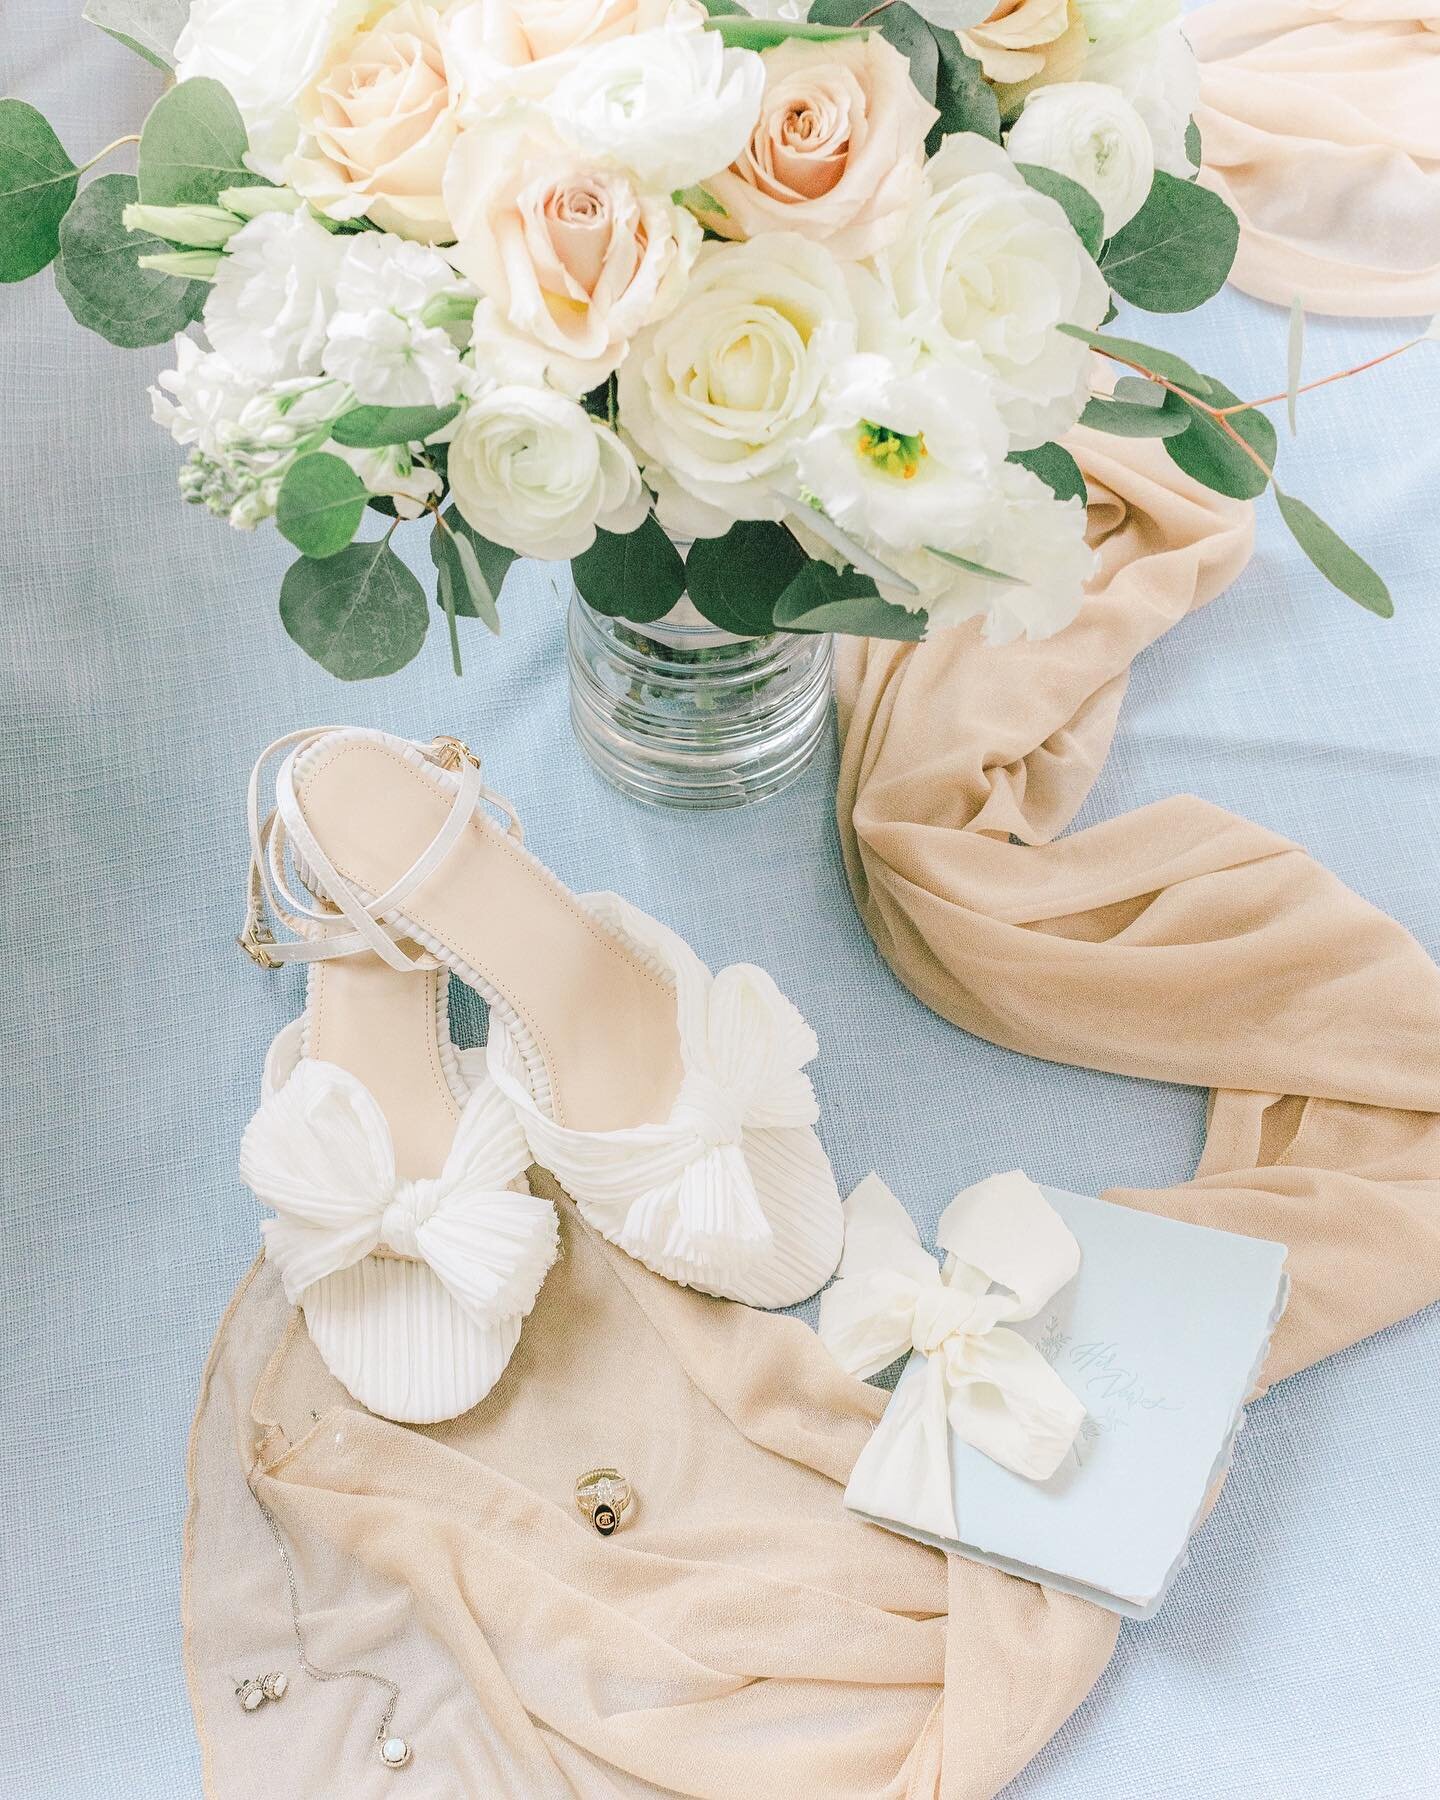 Classically Charleston details: cream + white with a touch of beige + blue.